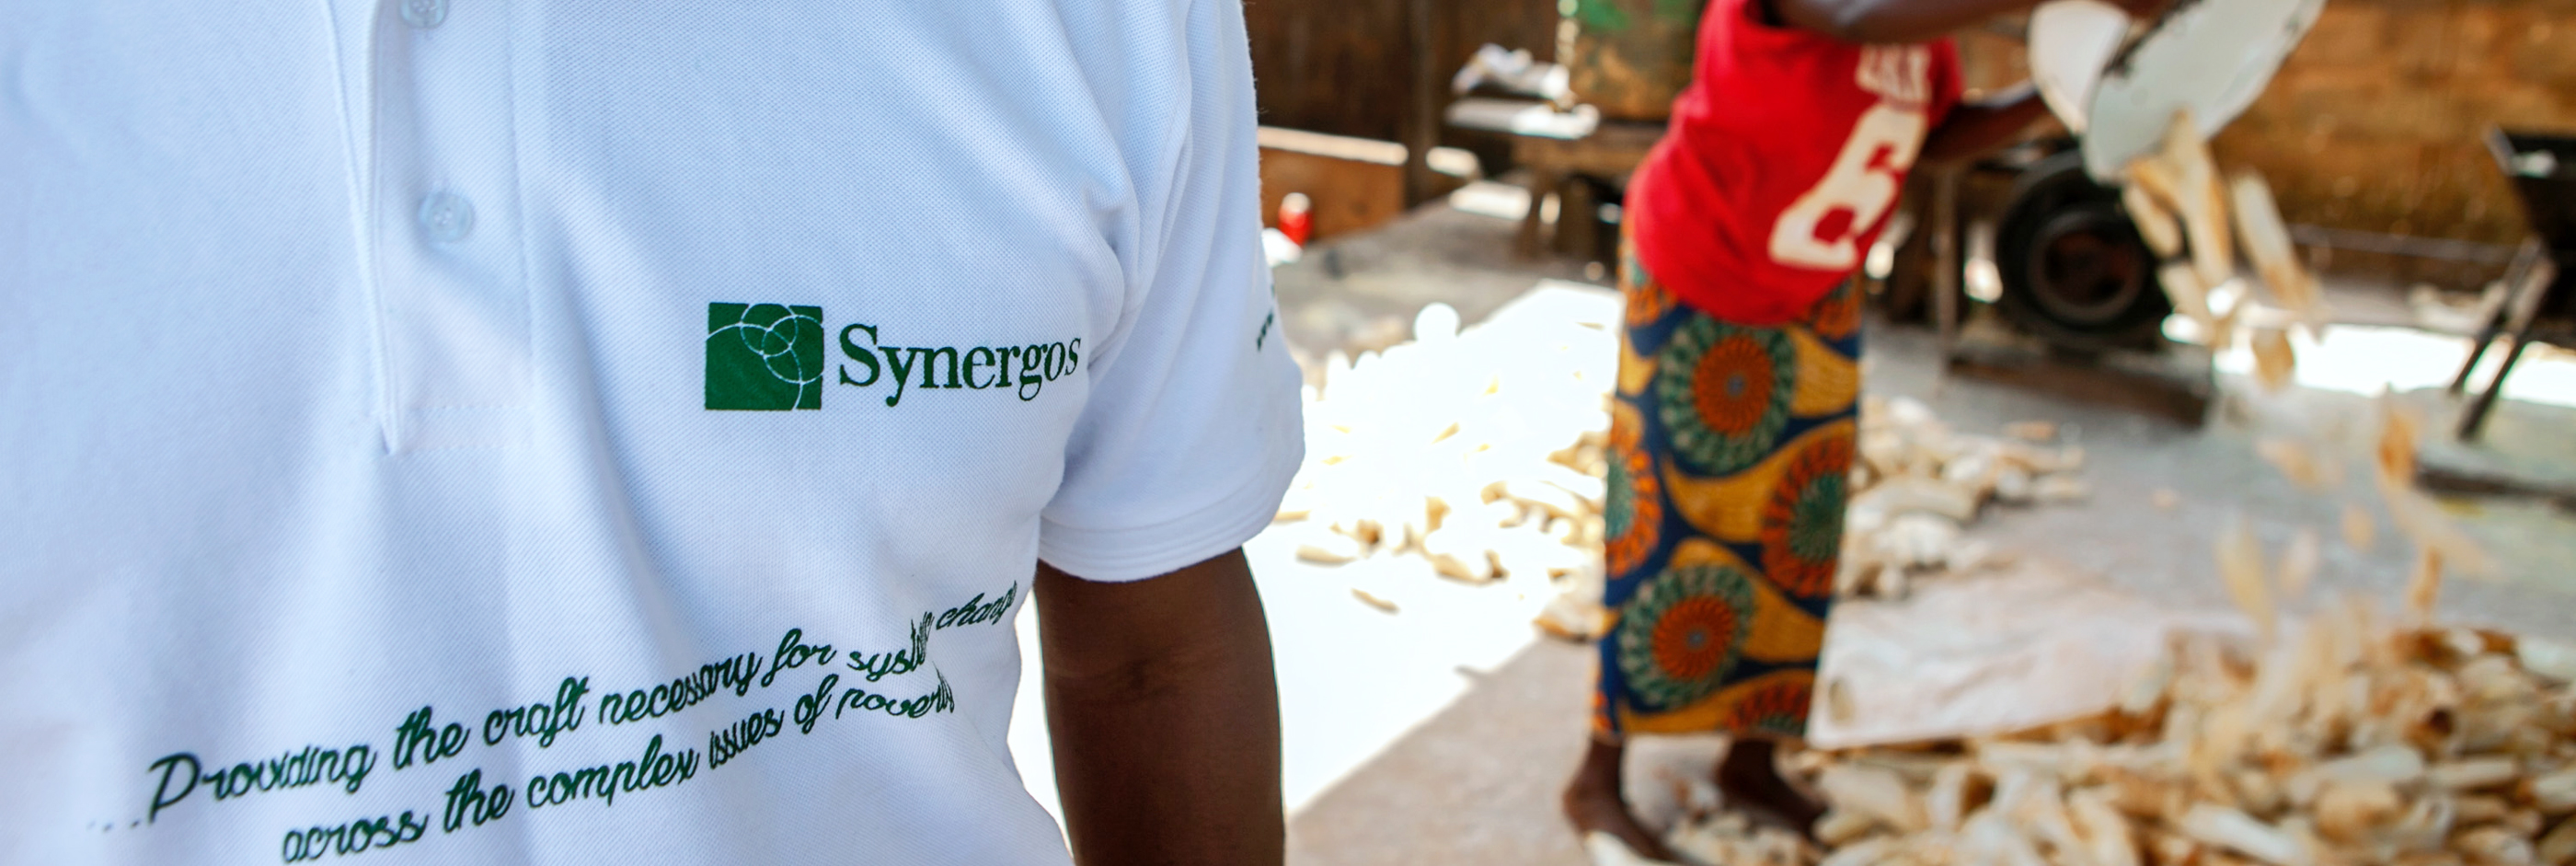 Synergos played a critical role in forging a strong, trusting relationship between Crest Agro and the smallholder farmers of Kogi state.